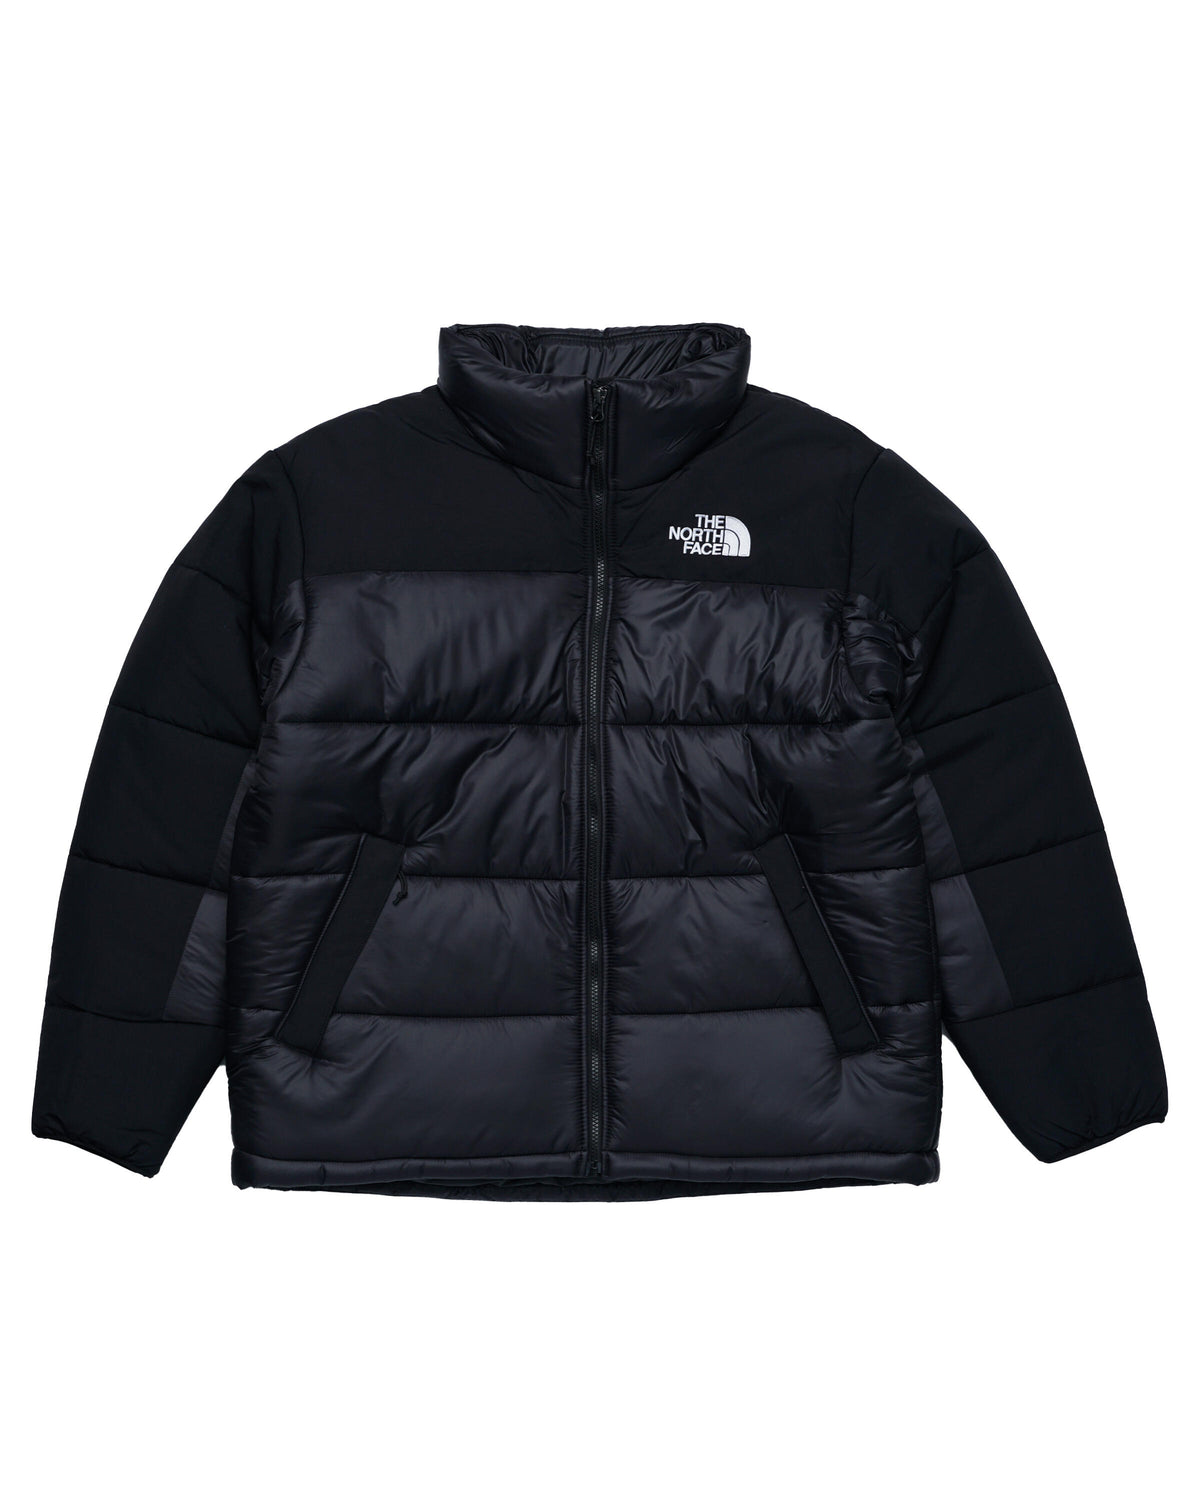 The North Face HIMALAYAN Insulated Jacket